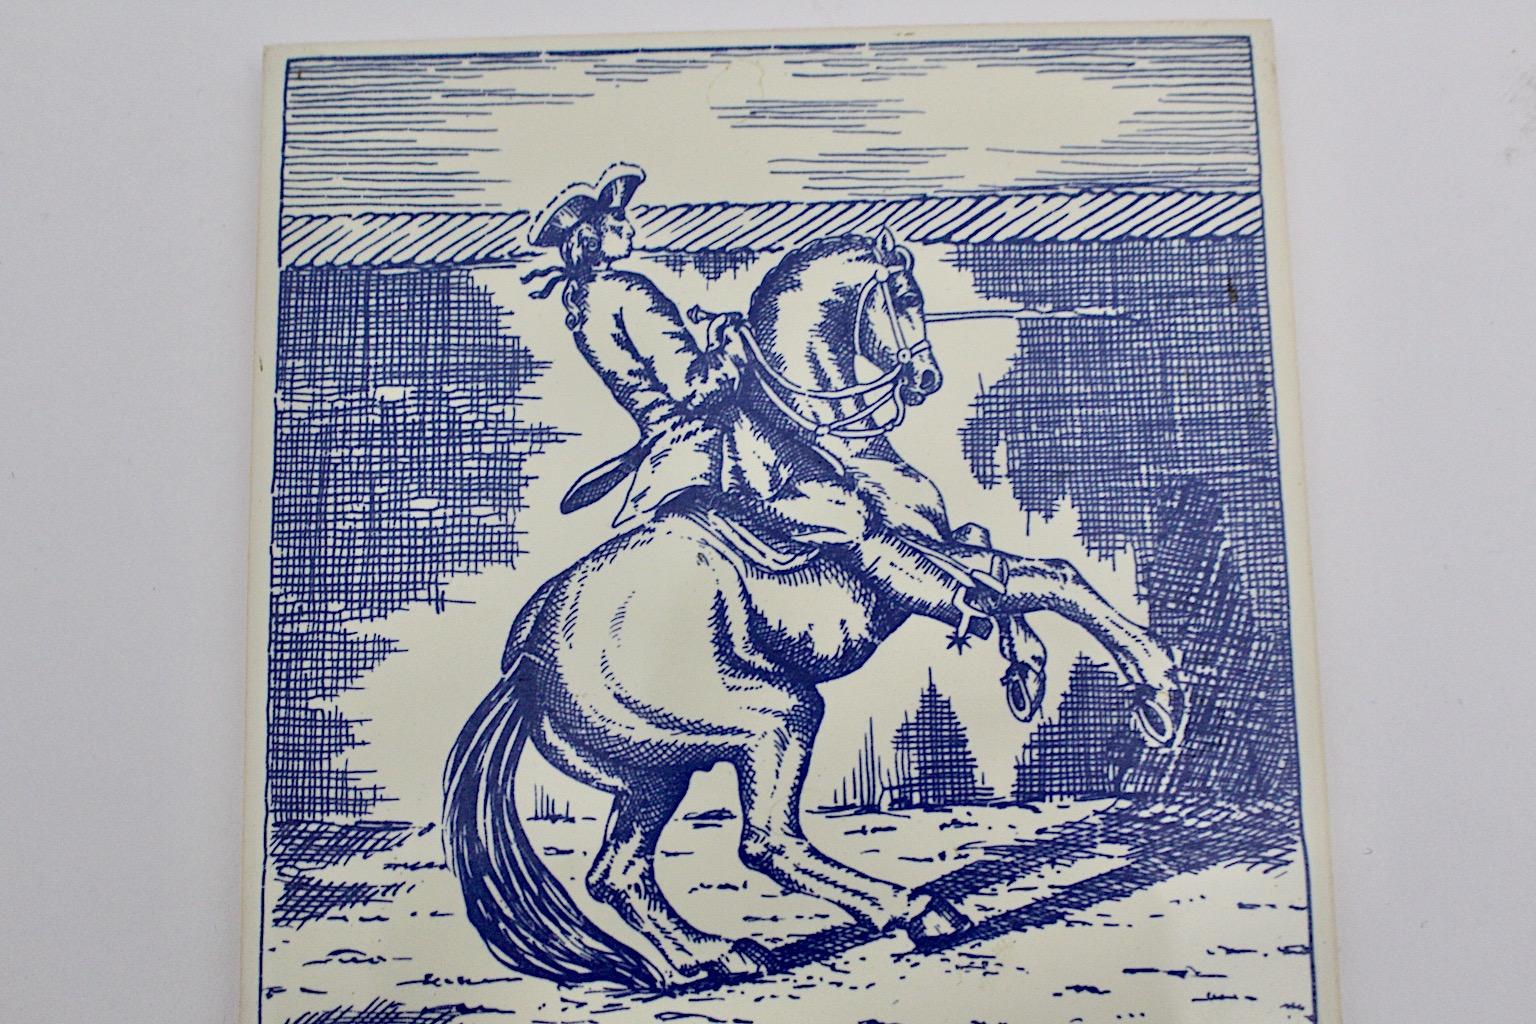 Mid-Century Modern Vintage ceramic tile in blue and white colors 1960s Austria.
A wonderful ceramic tile with motif Baroque cavalier on horseback in pastel blue and white color tones 1960s Austria.
Labeled on the backside made in Austria
Easy to